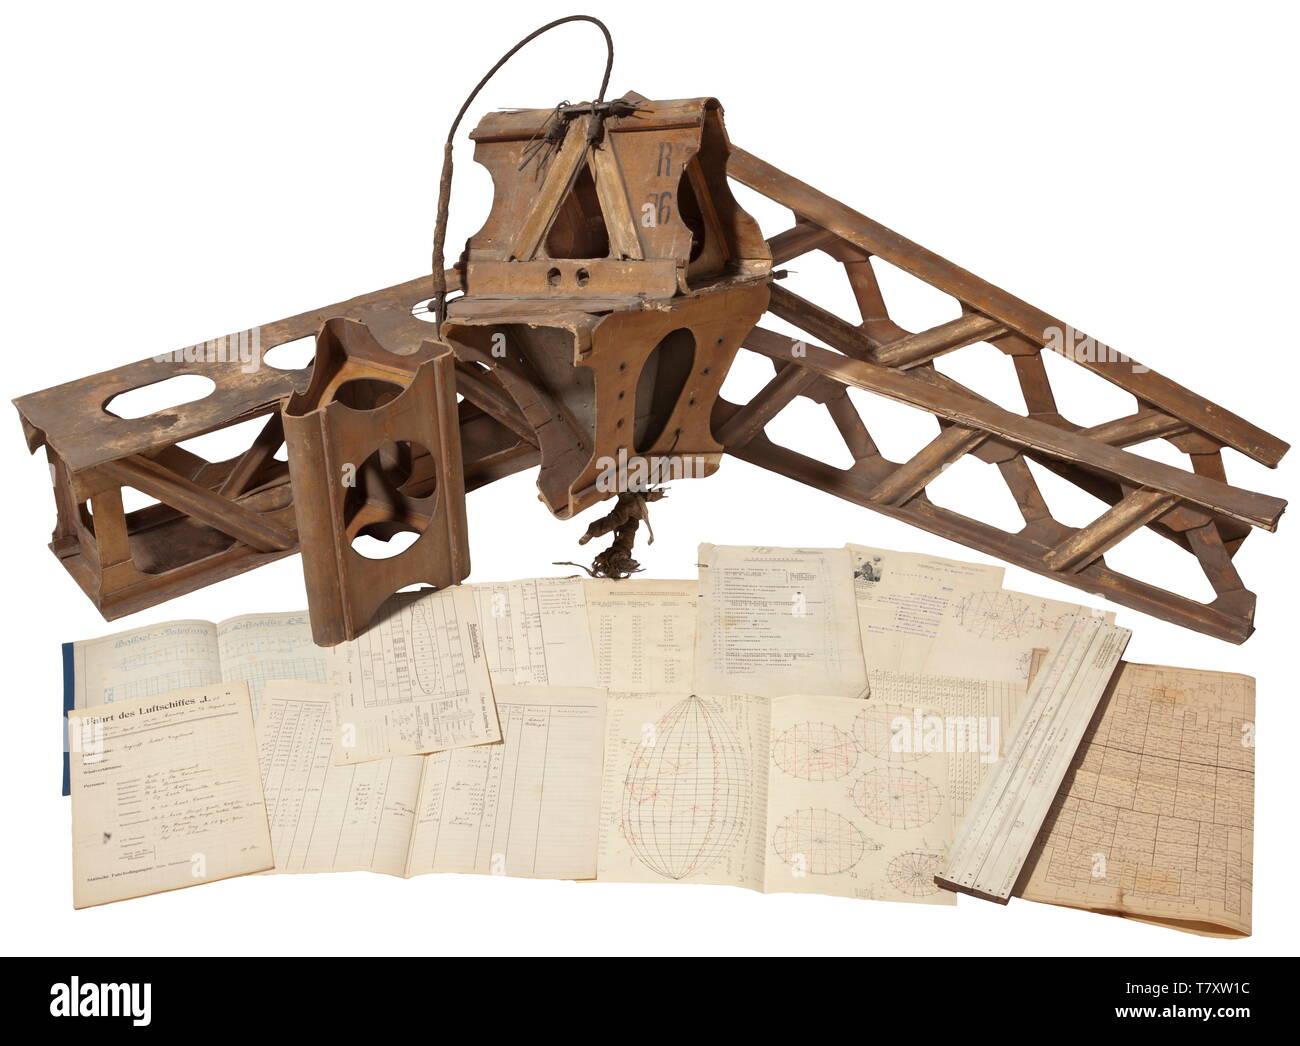 The estate of a naval airship crew member. Original remnants of the wooden frame from a Schütte-Lanz airship (probably SL 4): five supports of filigreed plywood construction, two with triangular cross-section (one inscribed 'R 26'), two with flat and one with rectangular cross-section. Included is a folder with documentation on airships of the Nordholz airship base, among which are construction sketches and an inventory list for the SL 4, flight record 20th century, Editorial-Use-Only Stock Photo